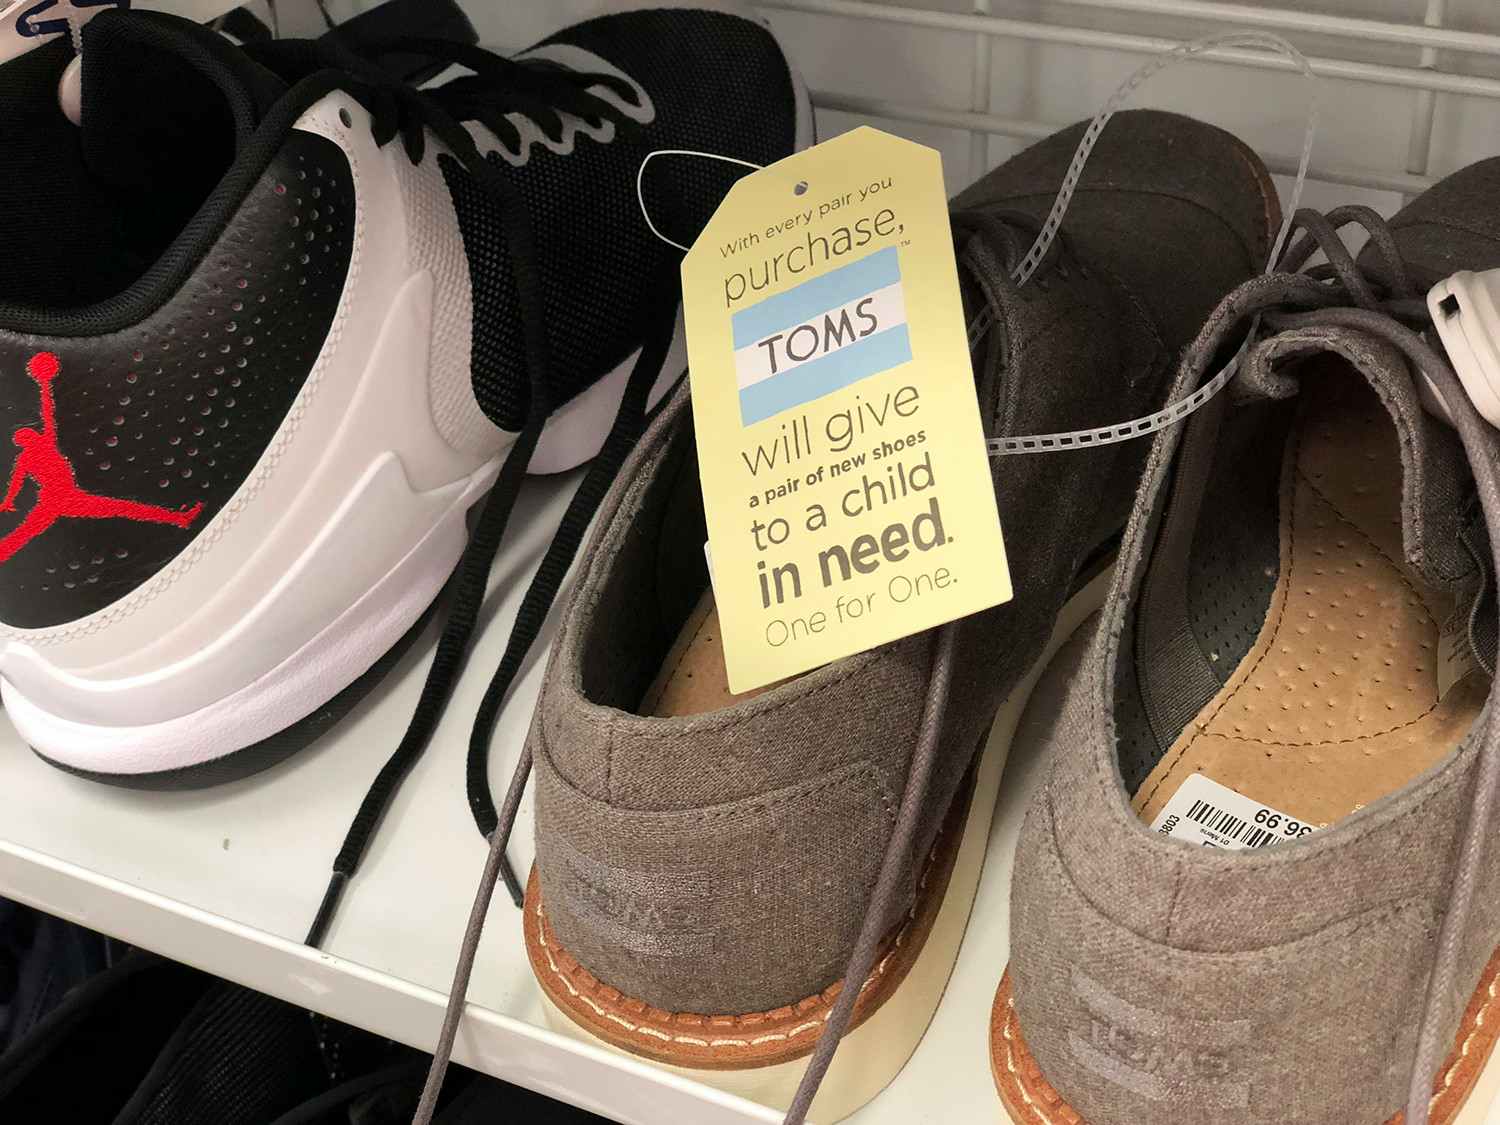 Toms shoes for Men, Women & Kids at Ross. Men's loafers $36.99 compared to $59.50 at 6PM.com.